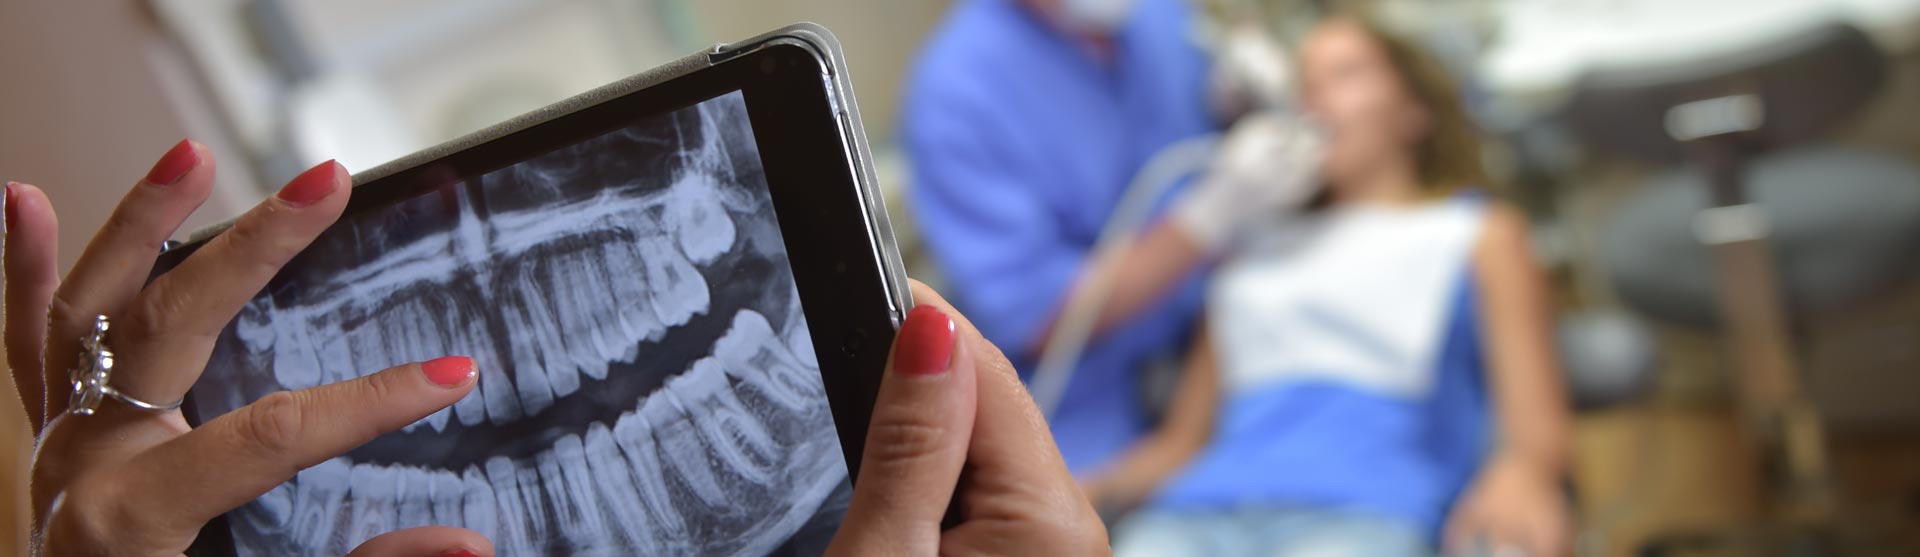 Digital tablet with a patients x-rays